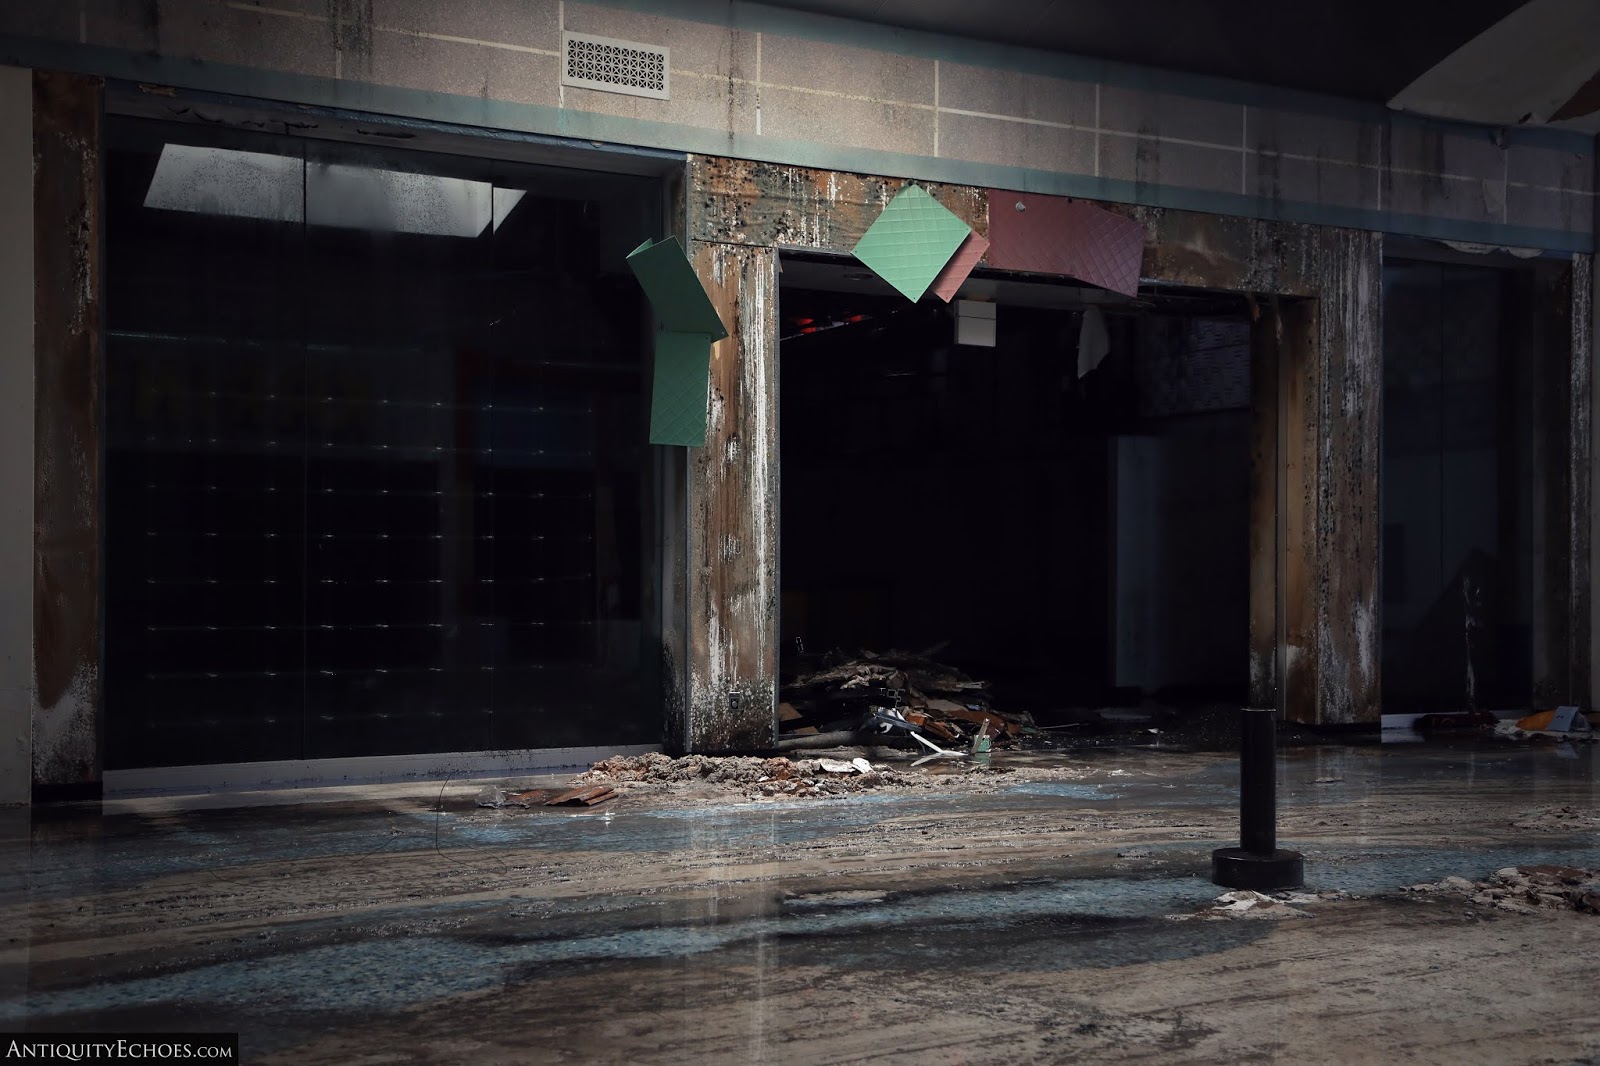 Antiquity Echoes: The Wayne Hills Mall